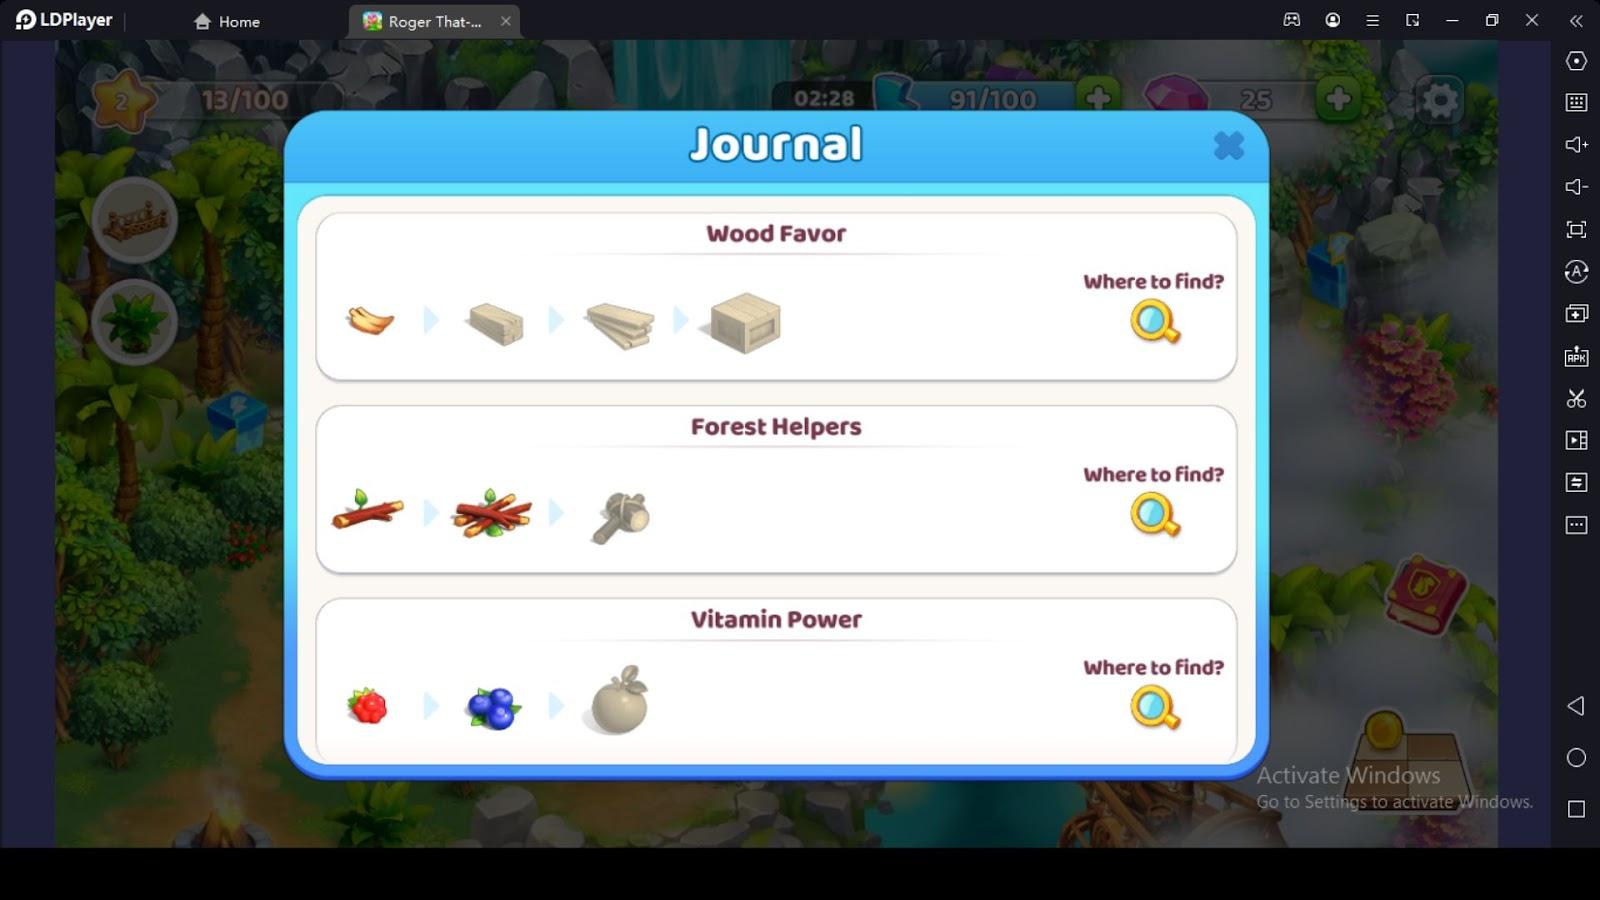 Get Help from Journal